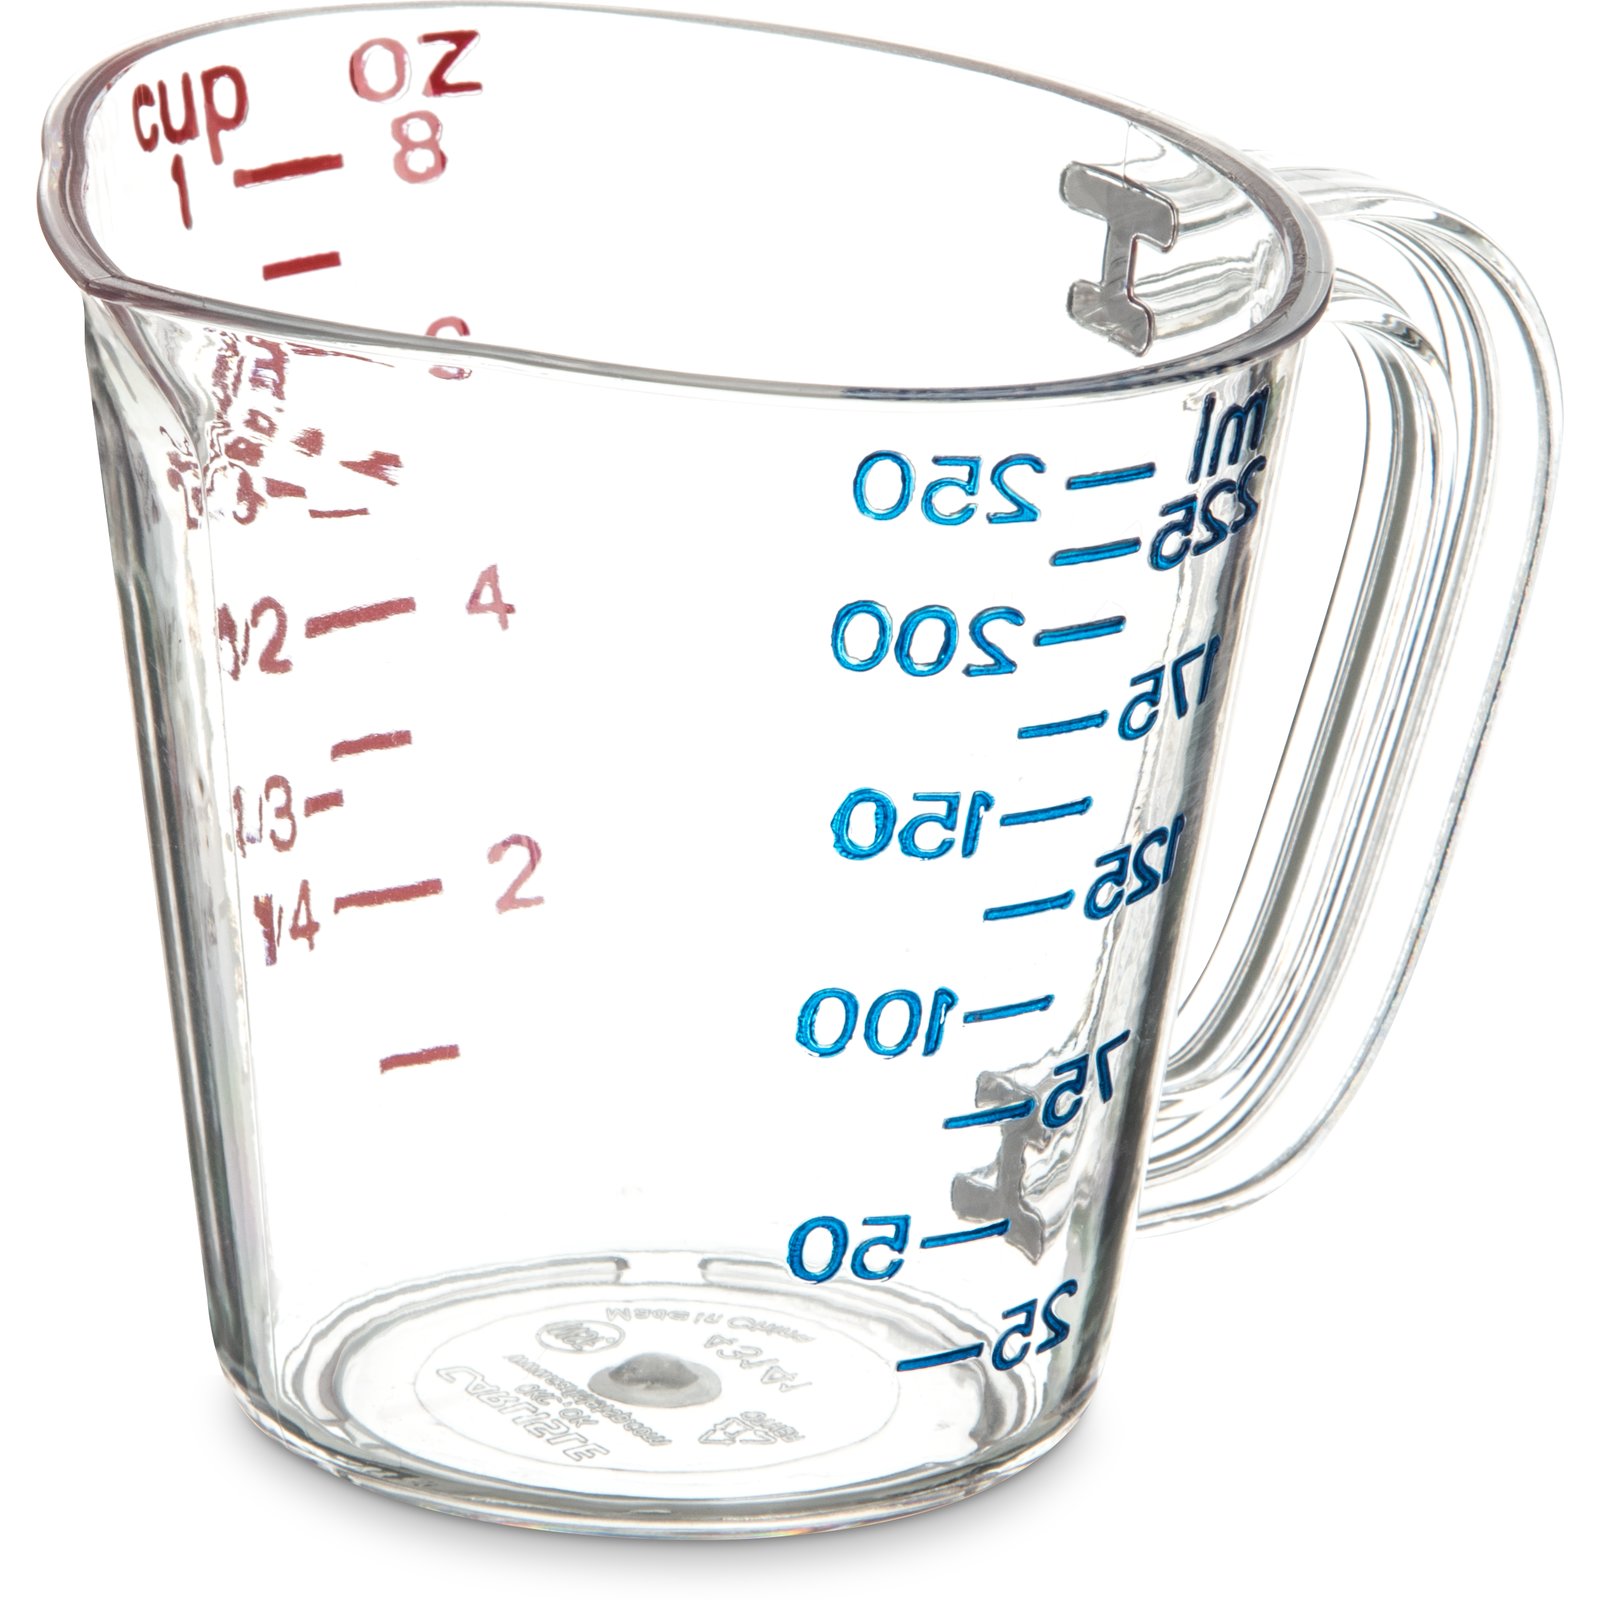 Carlisle 4314407 64 oz. Measuring Cup - Ford Hotel Supply